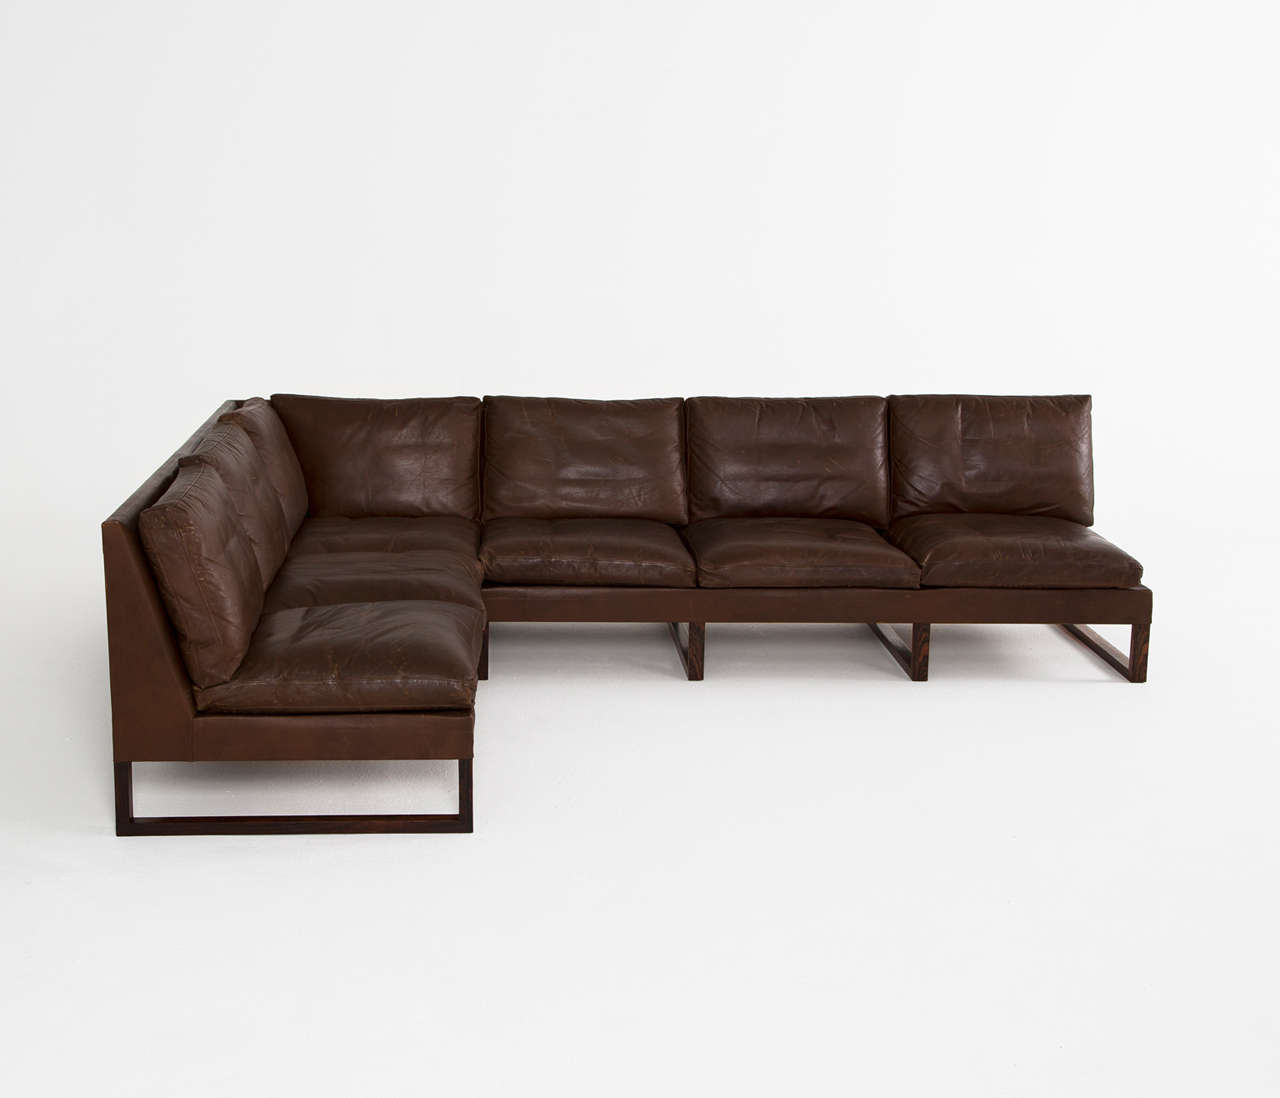 Cornersofa, leather and rosewood, Denmark 1960s. 

Very well conditioned sectional sofa in nice dark brown leather.
This 6-seather sofa consists of two elements, combined as a corner sofa model. 

The condition of this sectional sofa is superb.